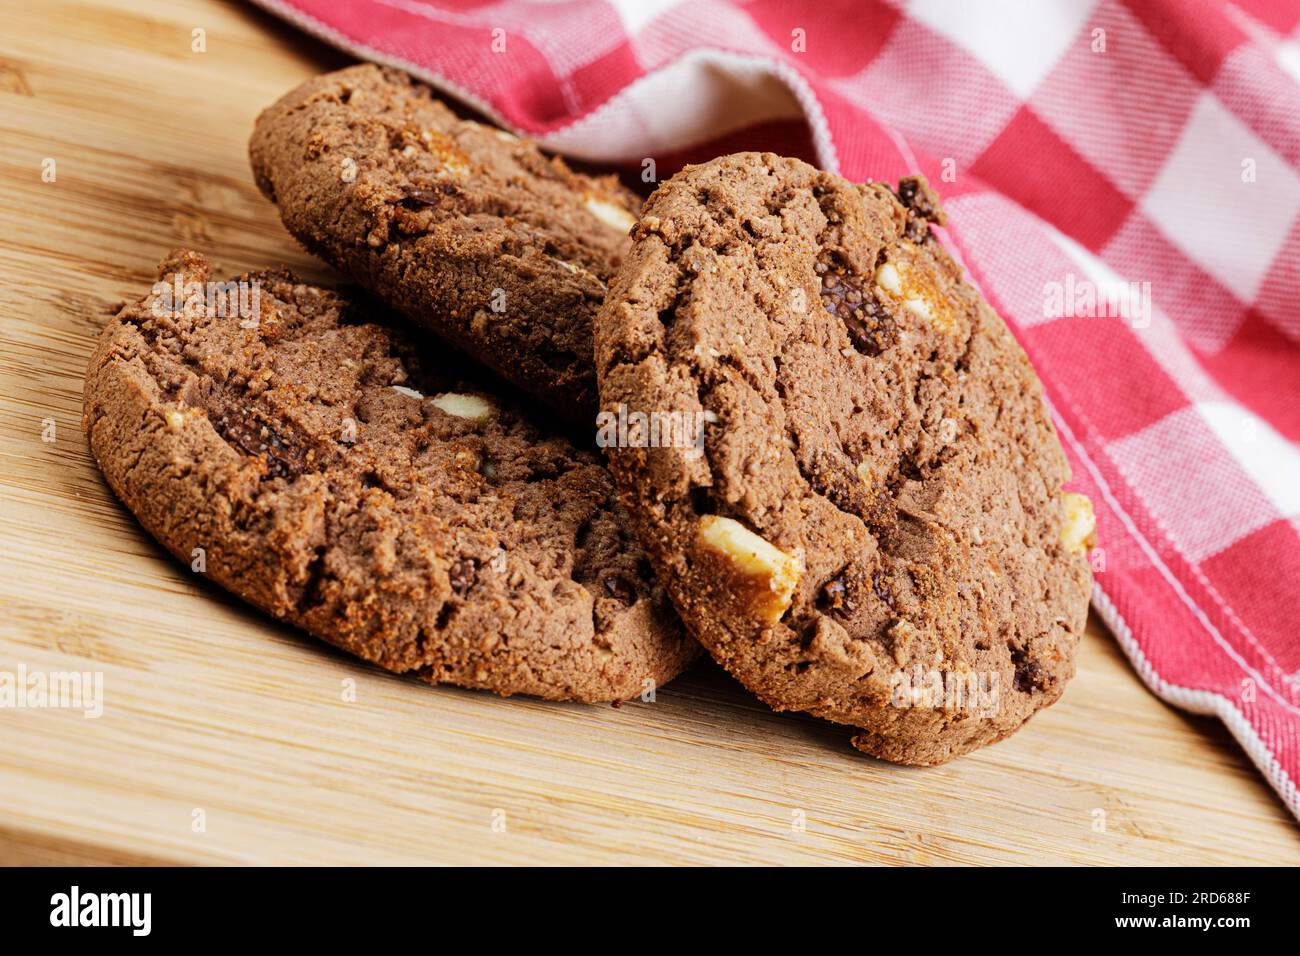 Close up of delicious tempting Chocolate Chip Cookies on a wooden background with copy space Stock Photo